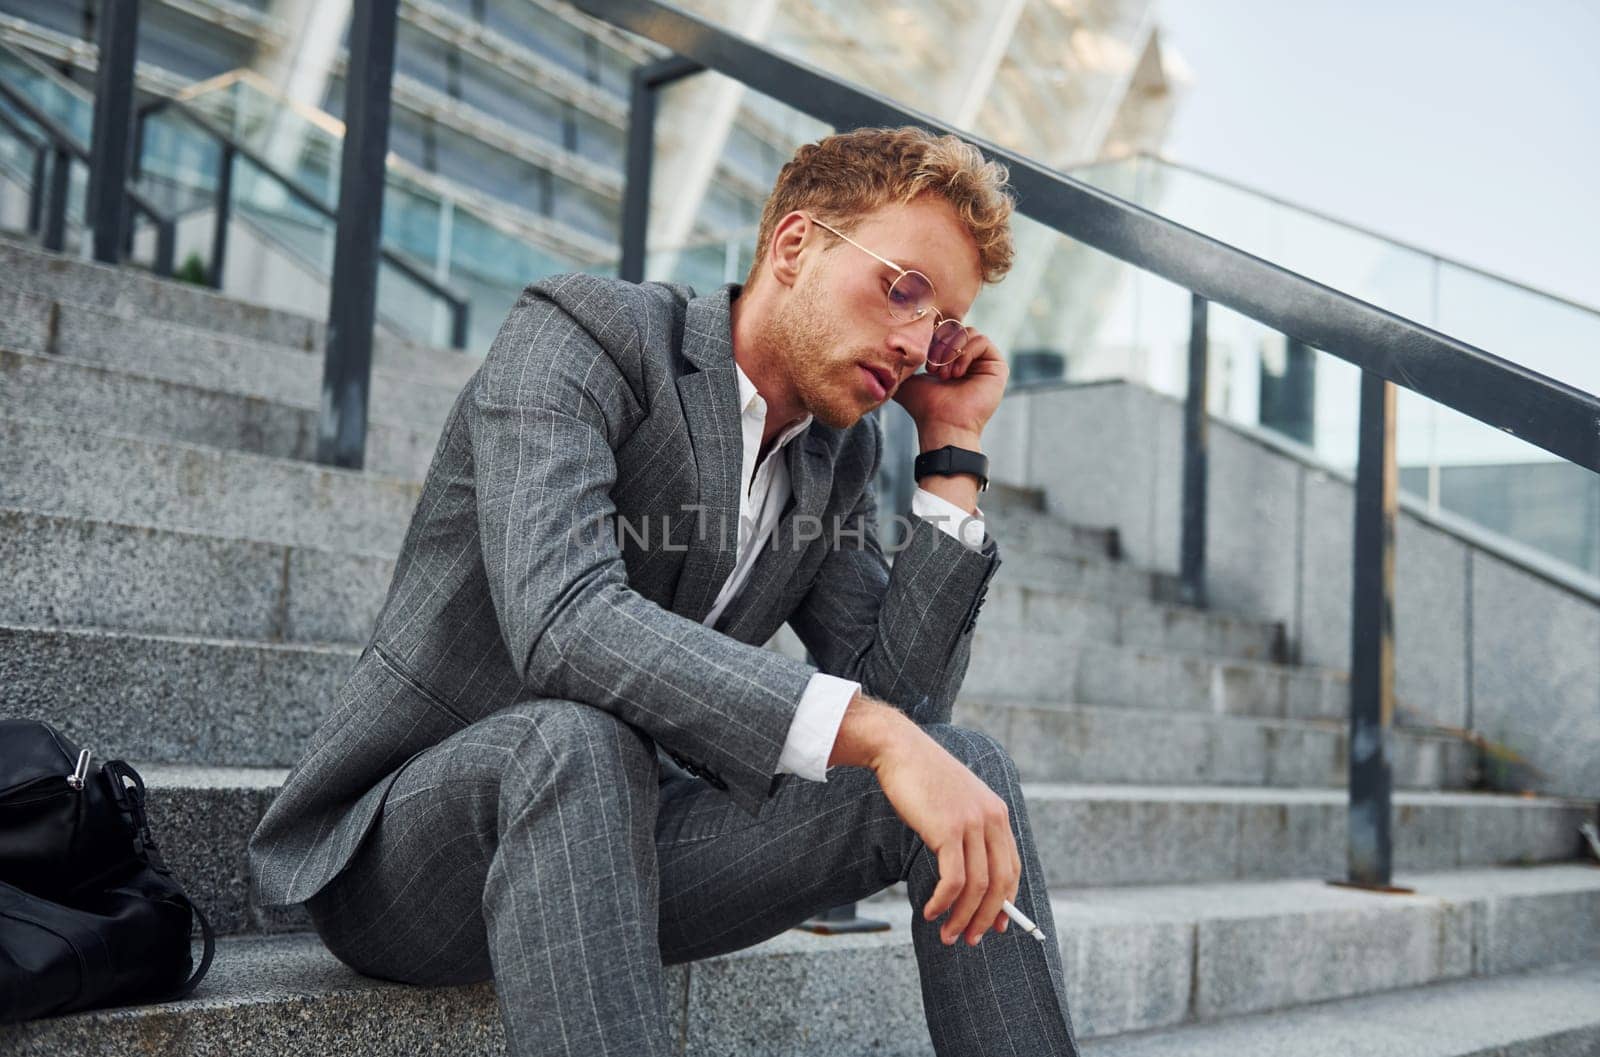 Smoking cigarette. Young businessman in grey formal wear is outdoors in the city by Standret